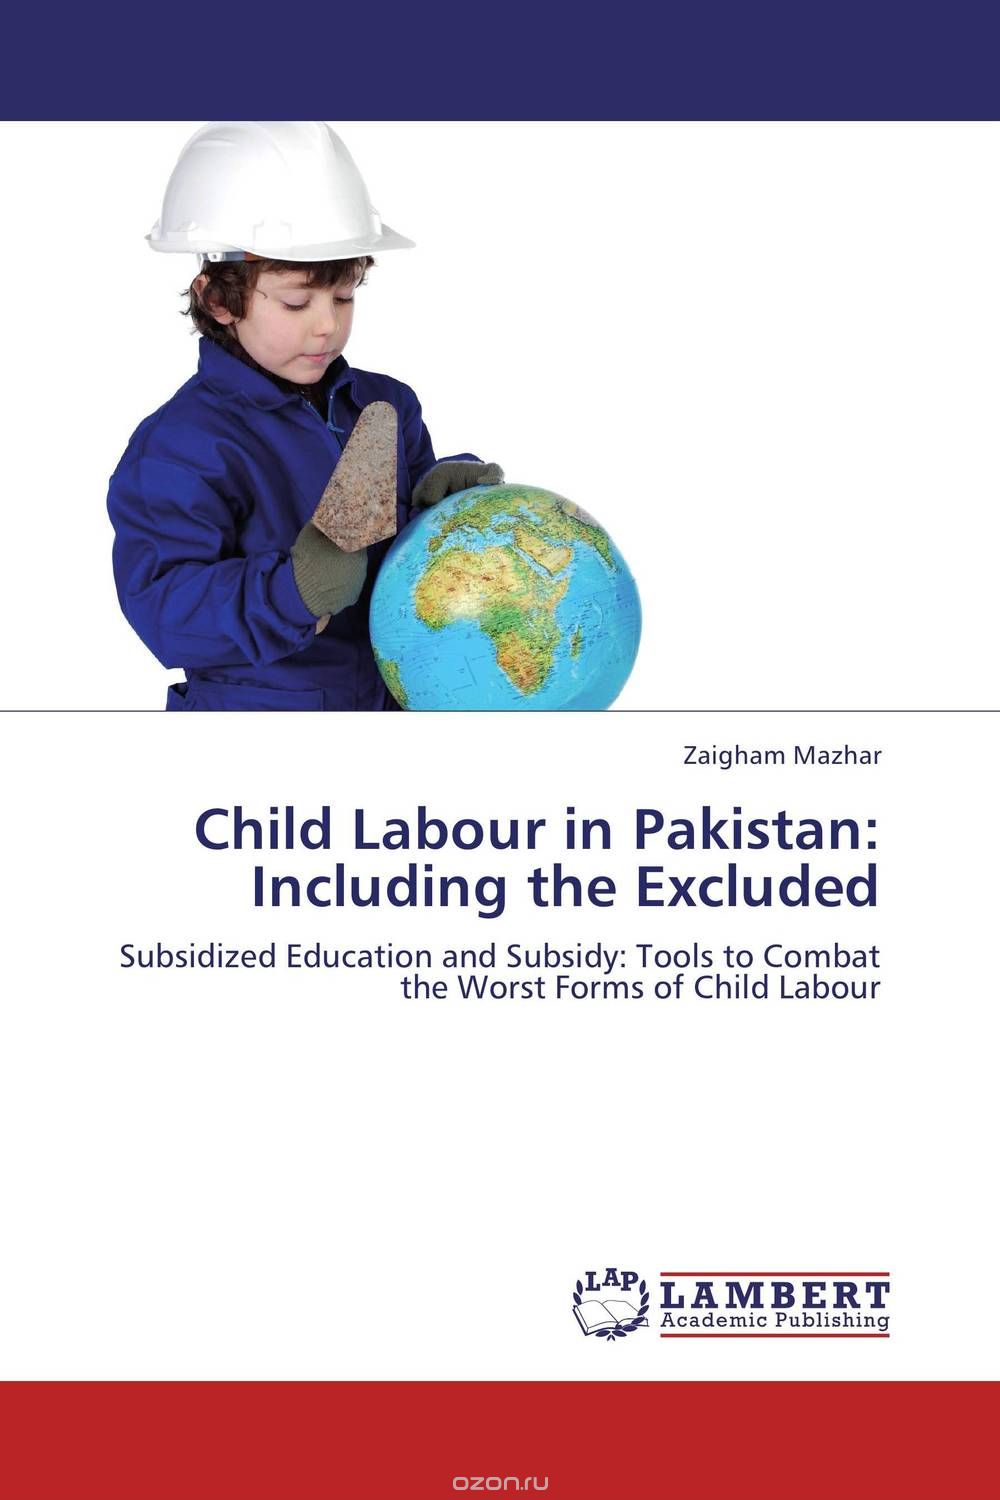 Child Labour in Pakistan: Including the Excluded